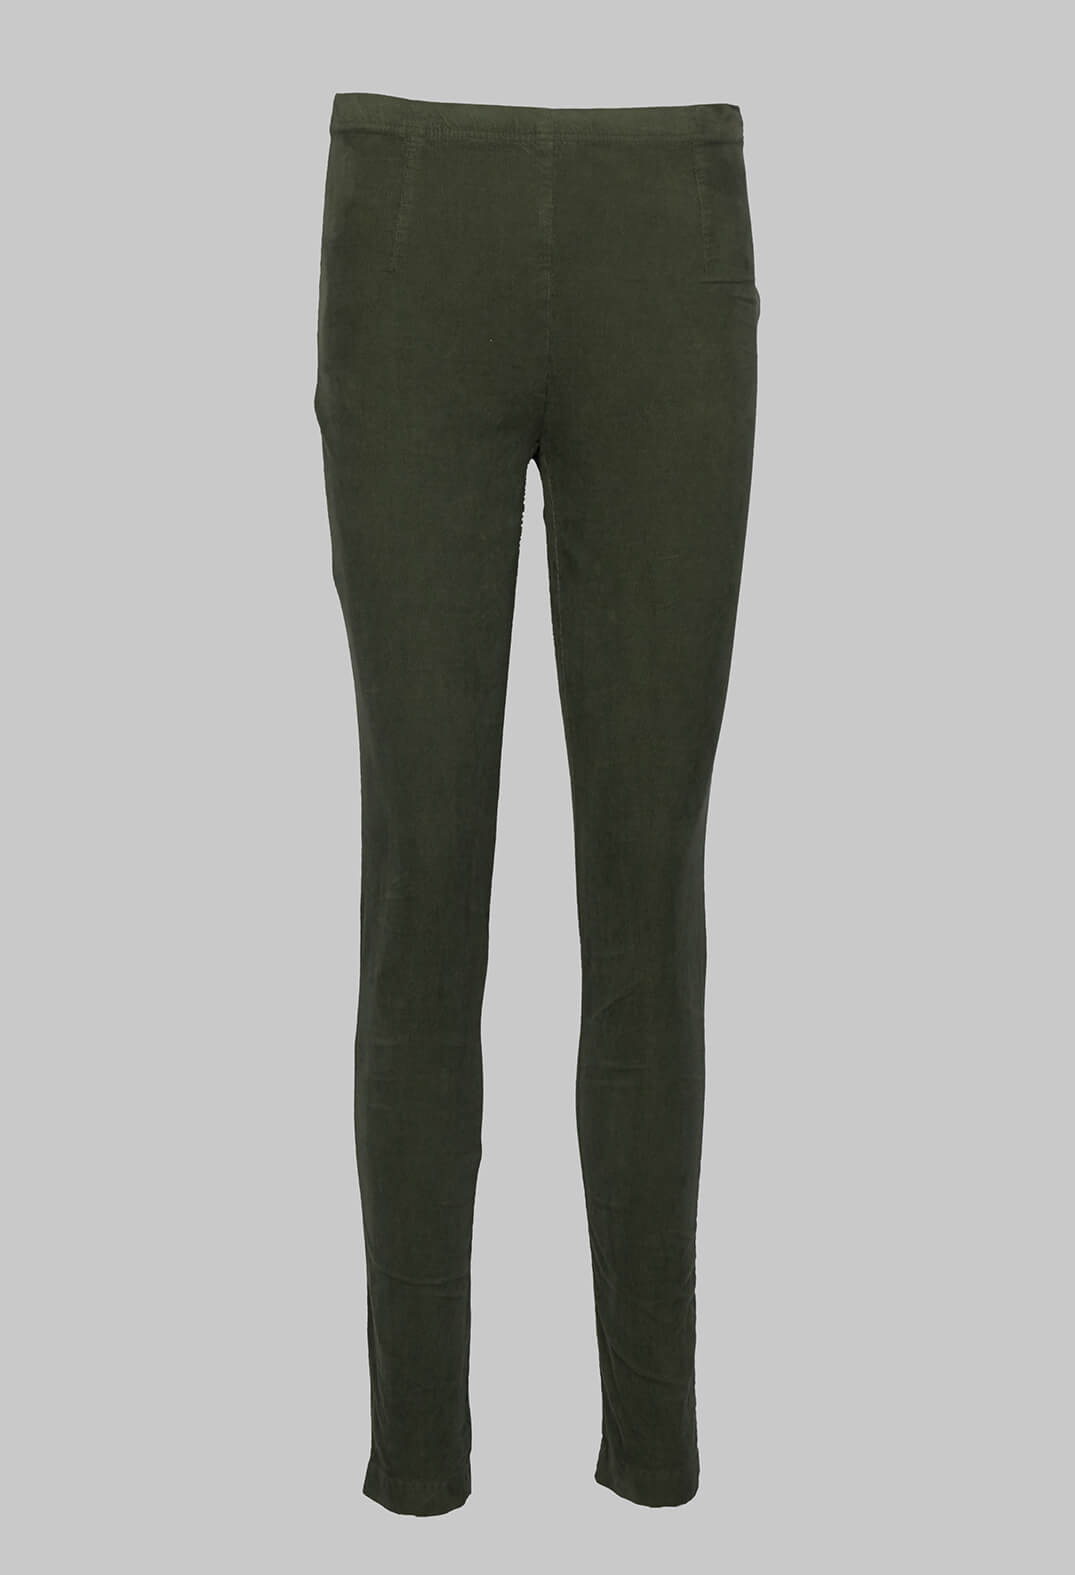 Skinny Fit Trousers in Teal